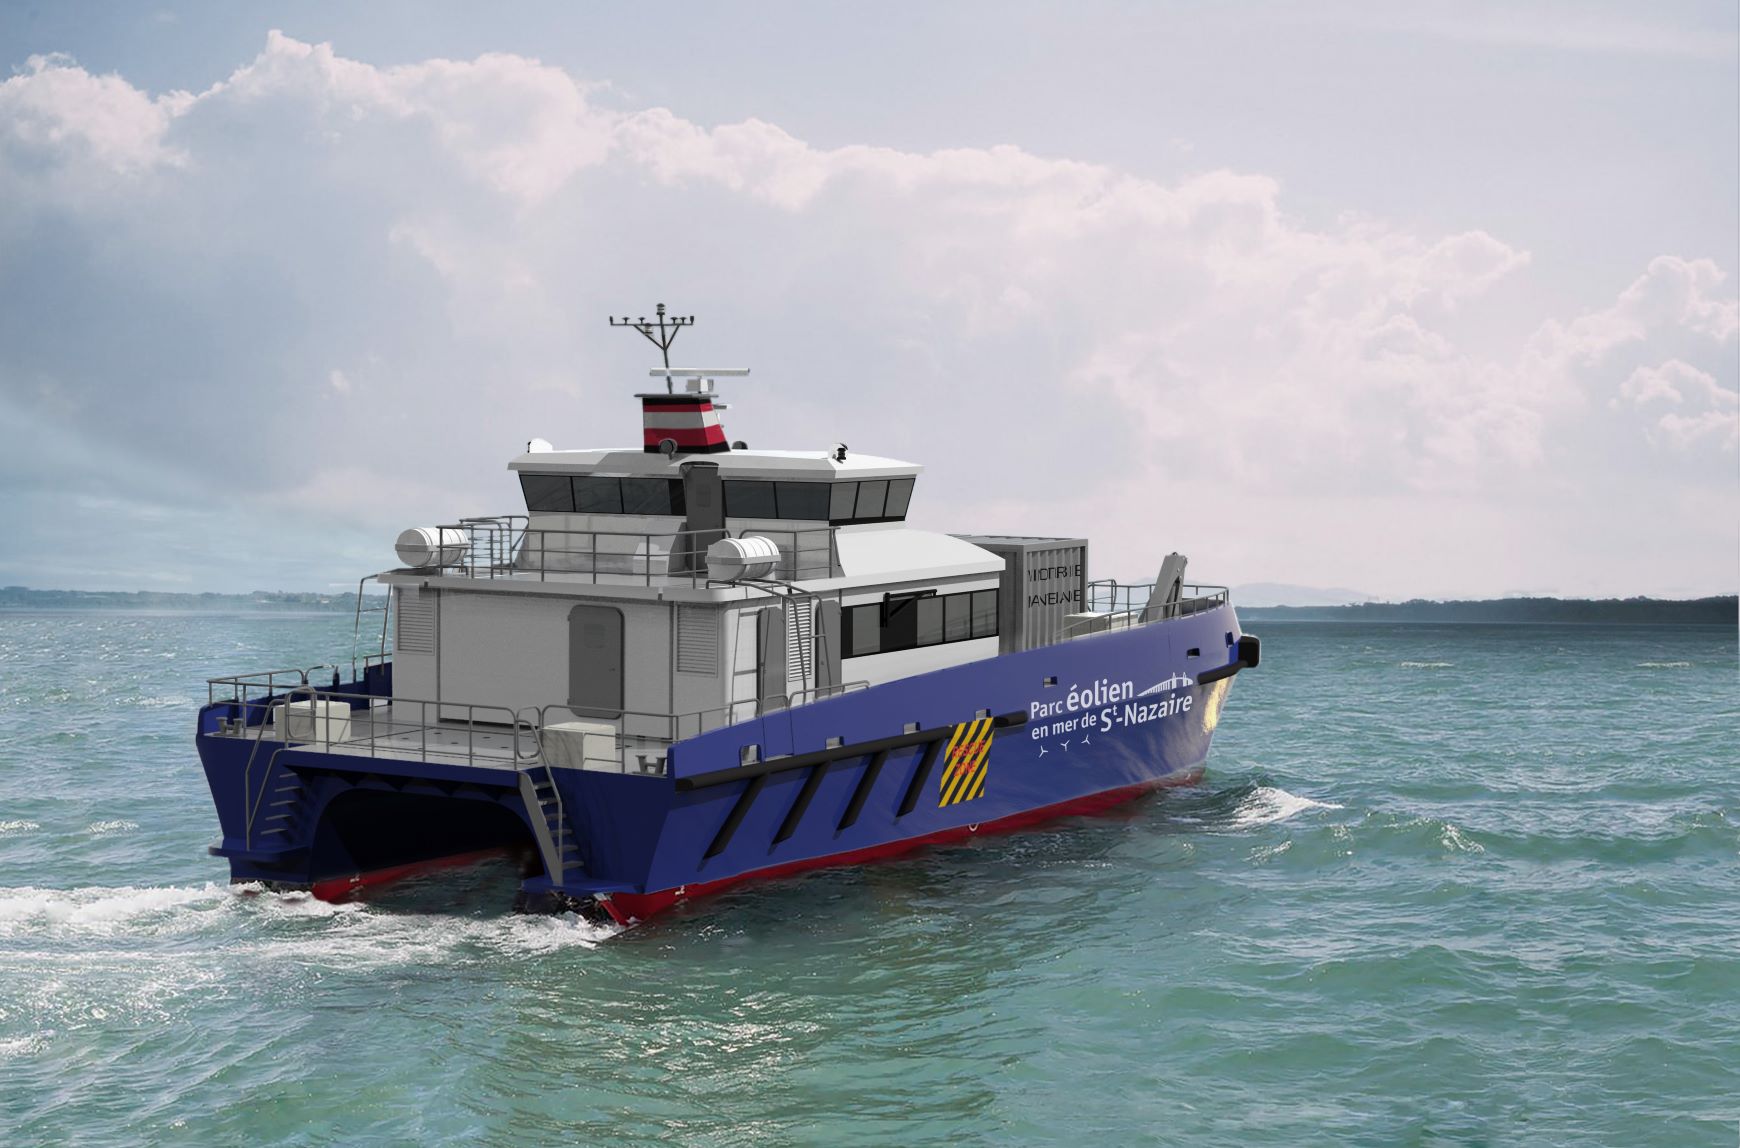 An image of the CTV to be delivered for the Saint-Nazaire offshore wind farm